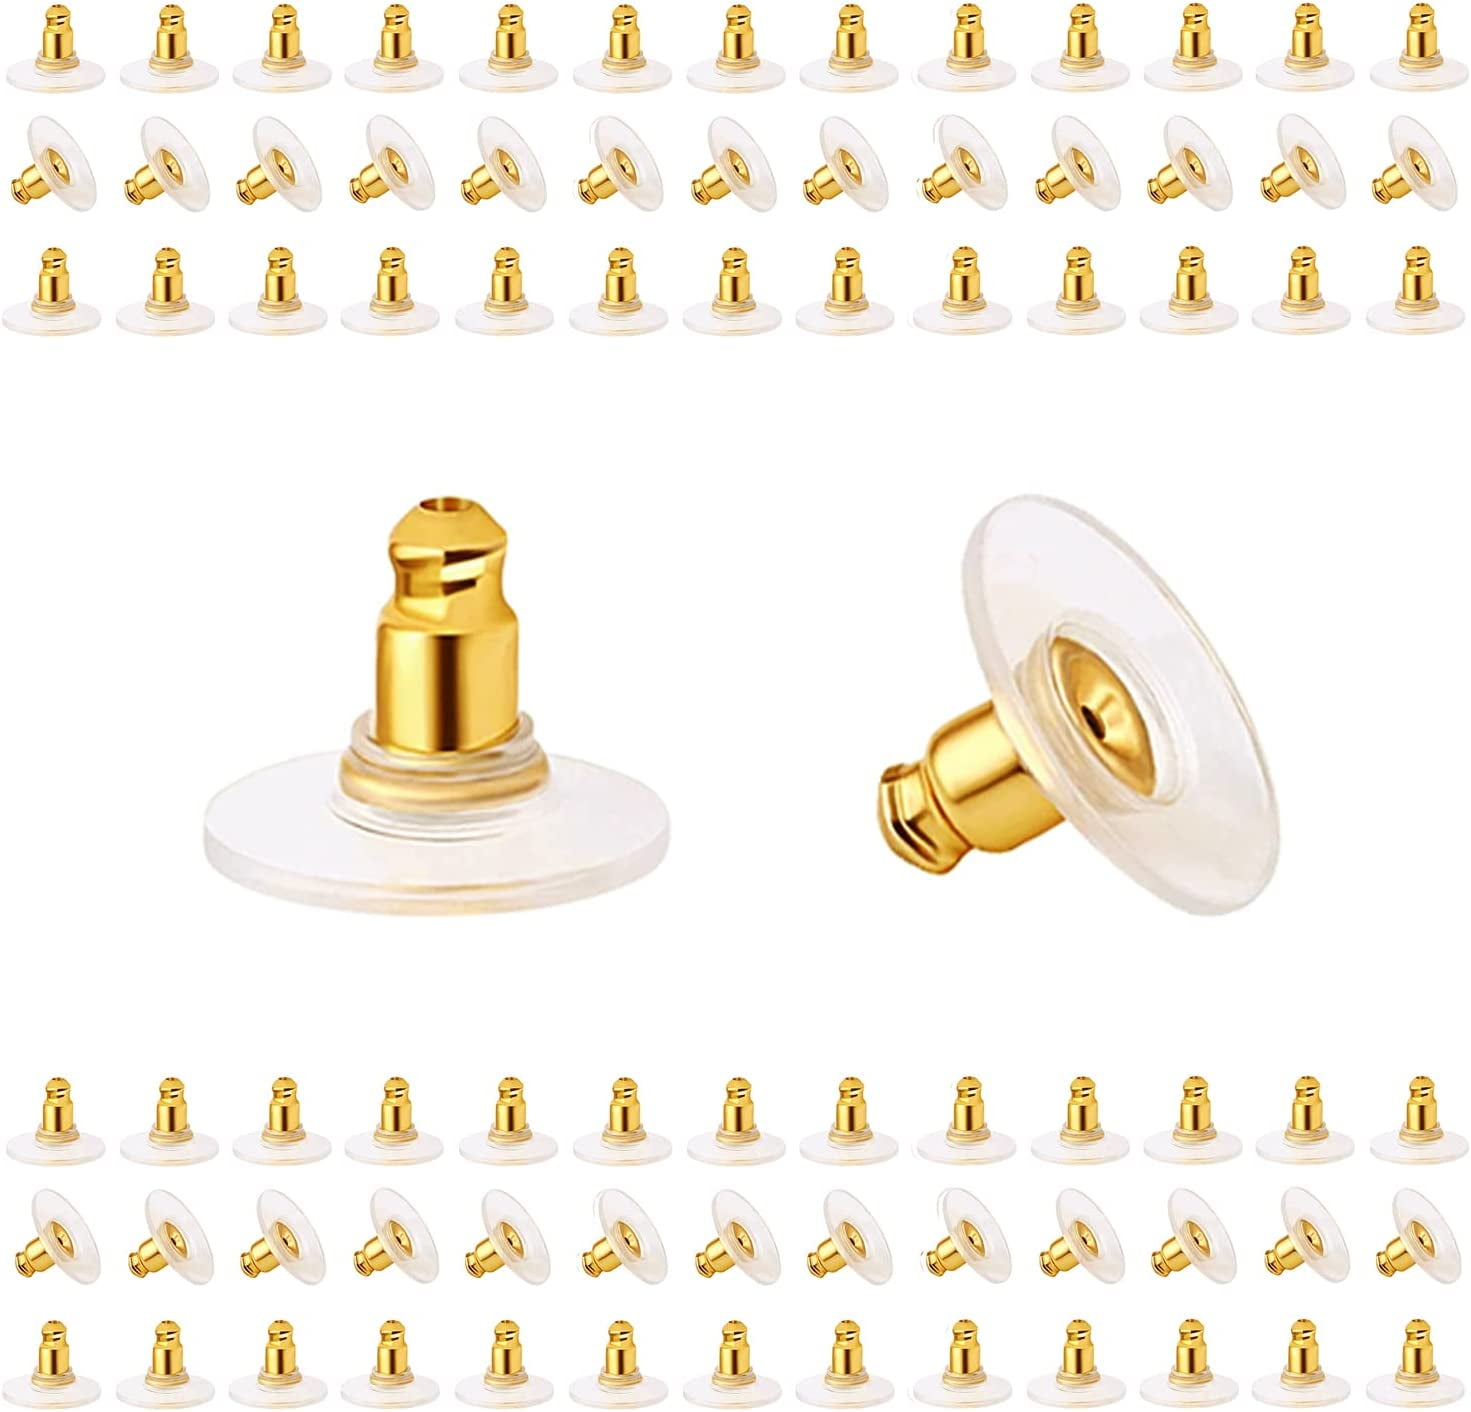 BEADNOVA Earring Backs Replacements Hypoallengeric Gold Plated Pierced  Earring Backing Stoppers Safety Bullet Clutch Earring Backs with Pad for  Posts